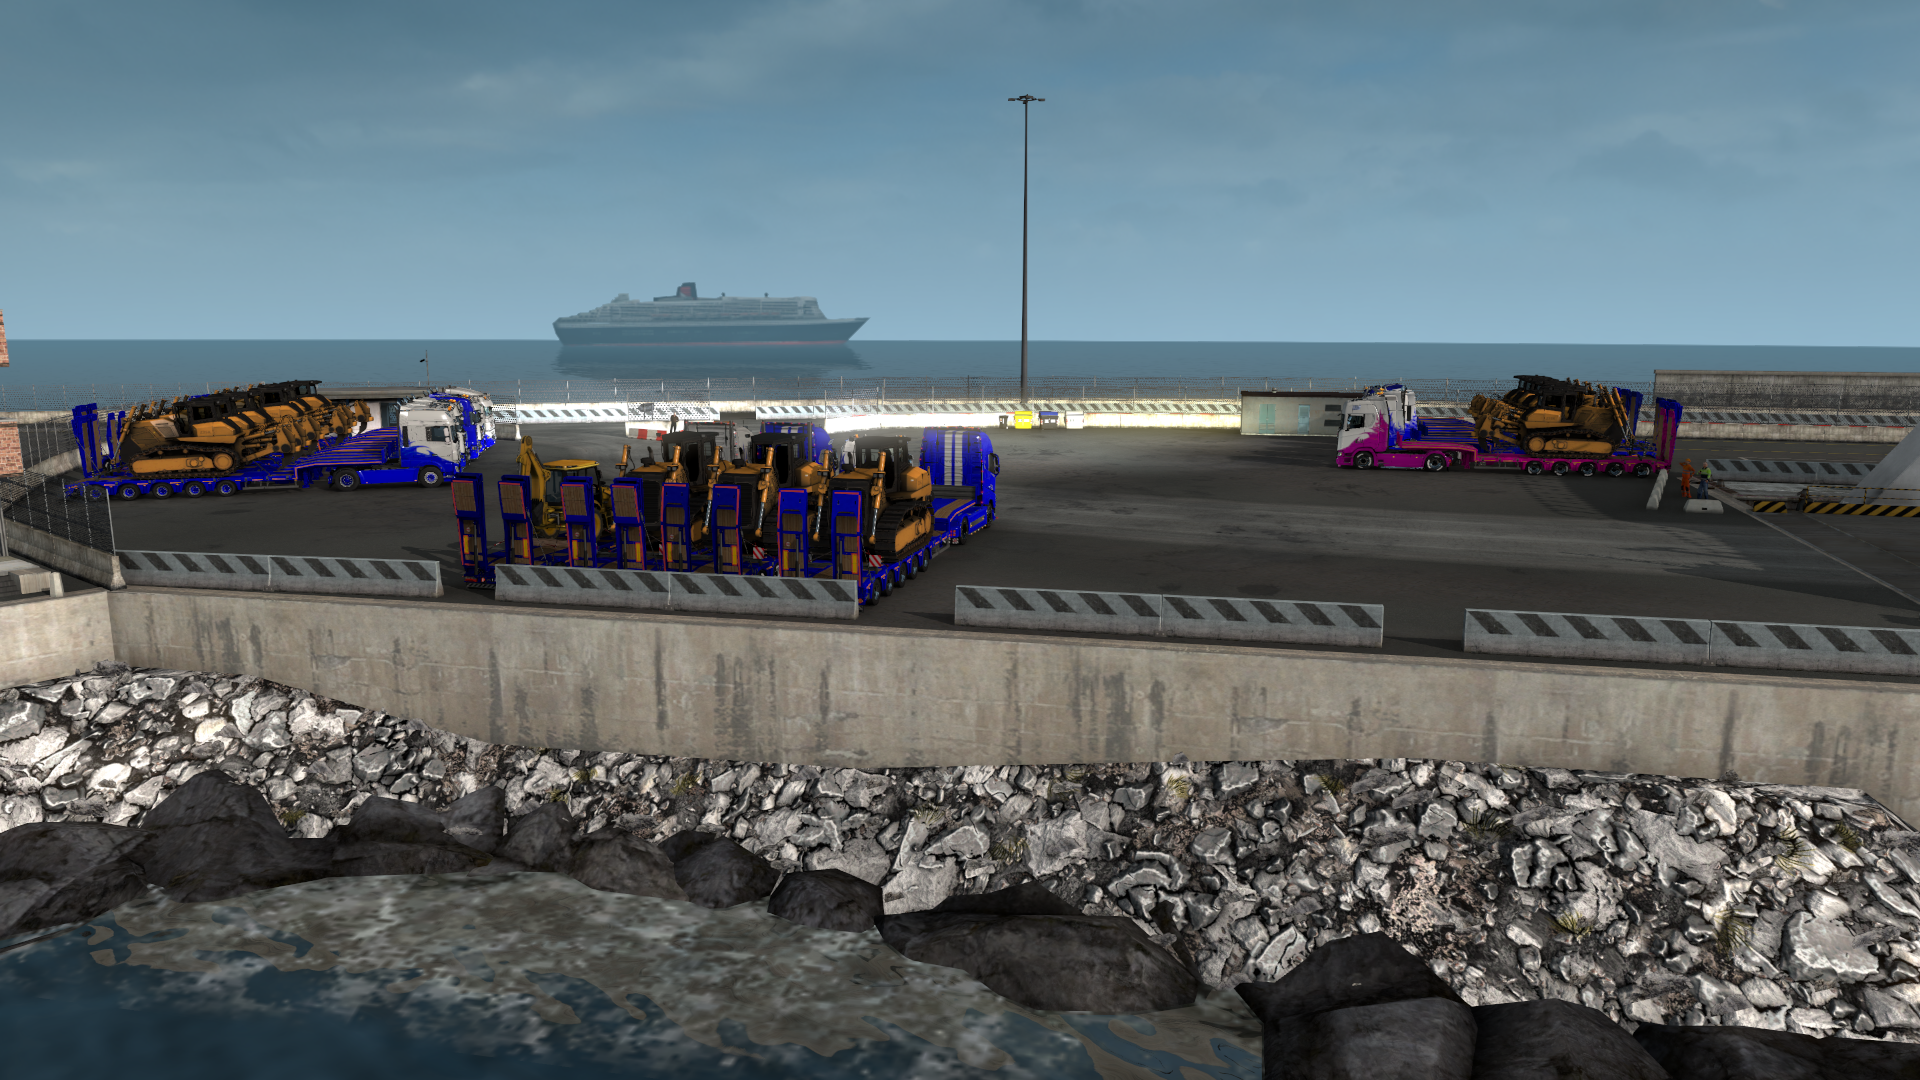 ets2_20210402_230751_00.png